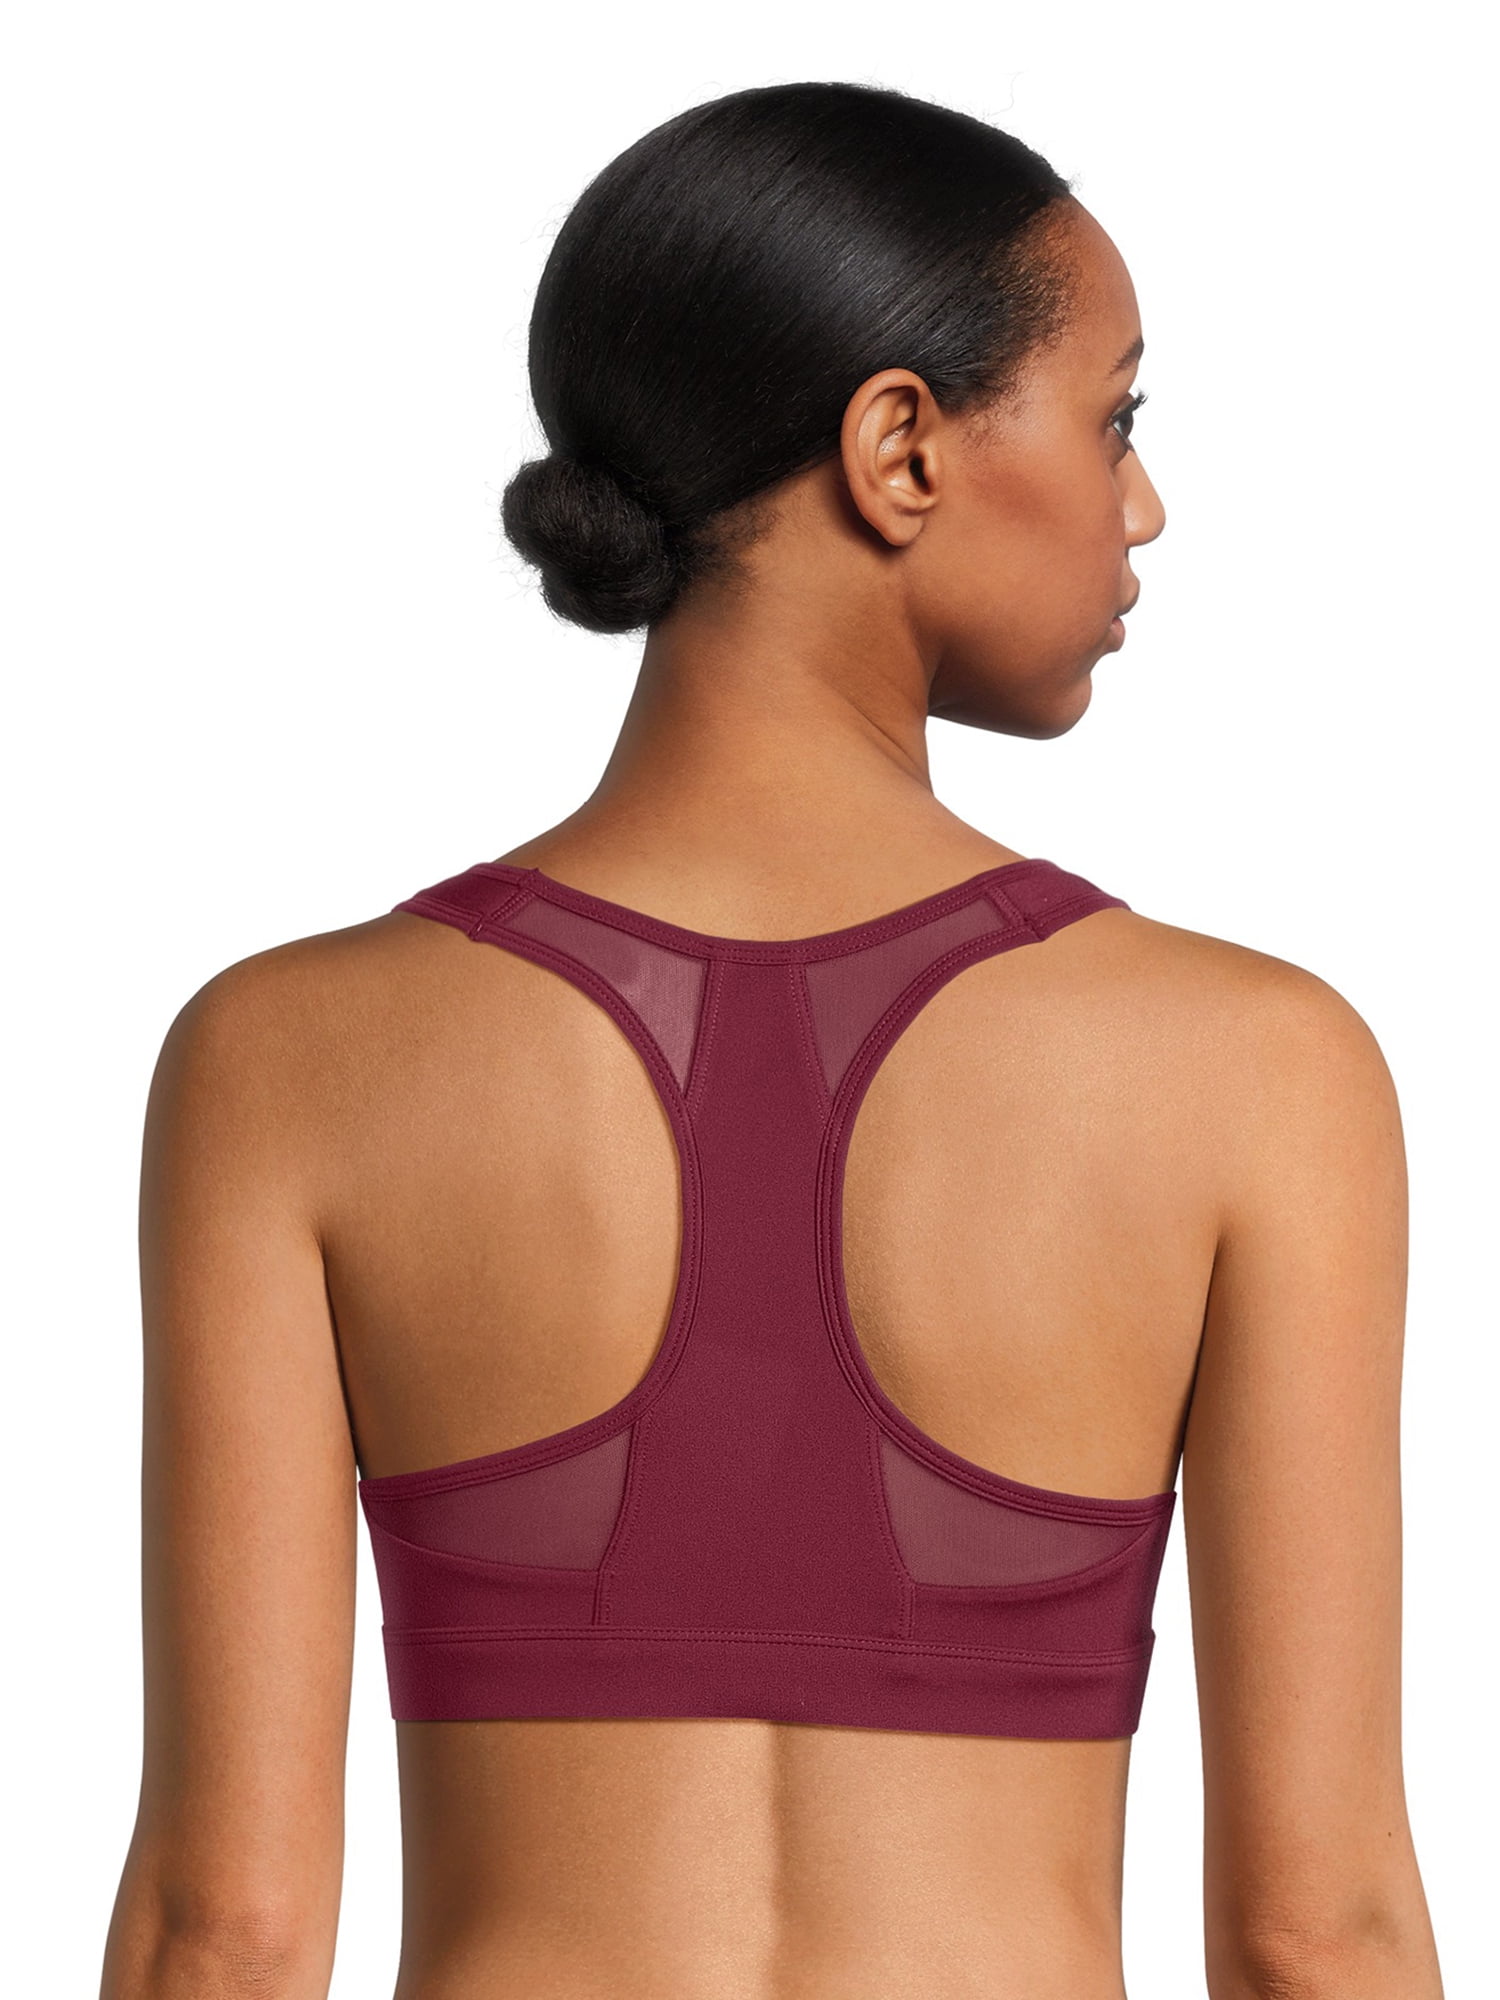 Avia Ruched Violet Razorback Sports Bra - Removable pads - Size XL (16-18)  NWT - $10 New With Tags - From Kaliq